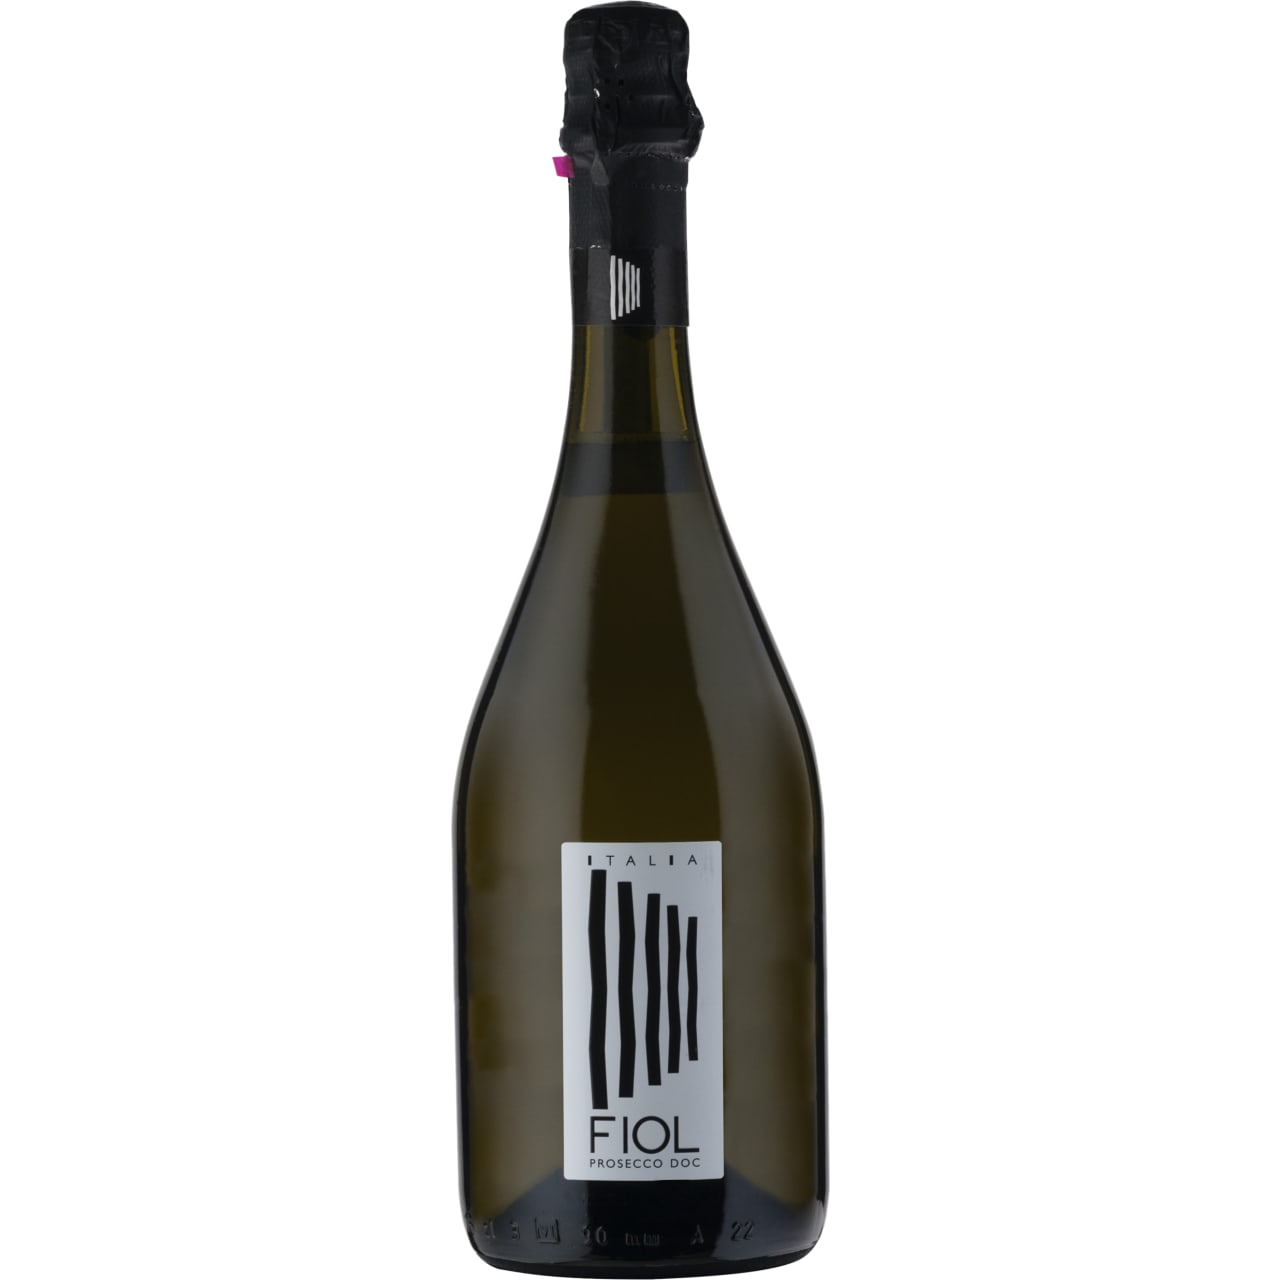 This stylish Prosecco has a pale lemon colour with a bouquet reminiscent of wisteria flowers, acacia and ripe apple.